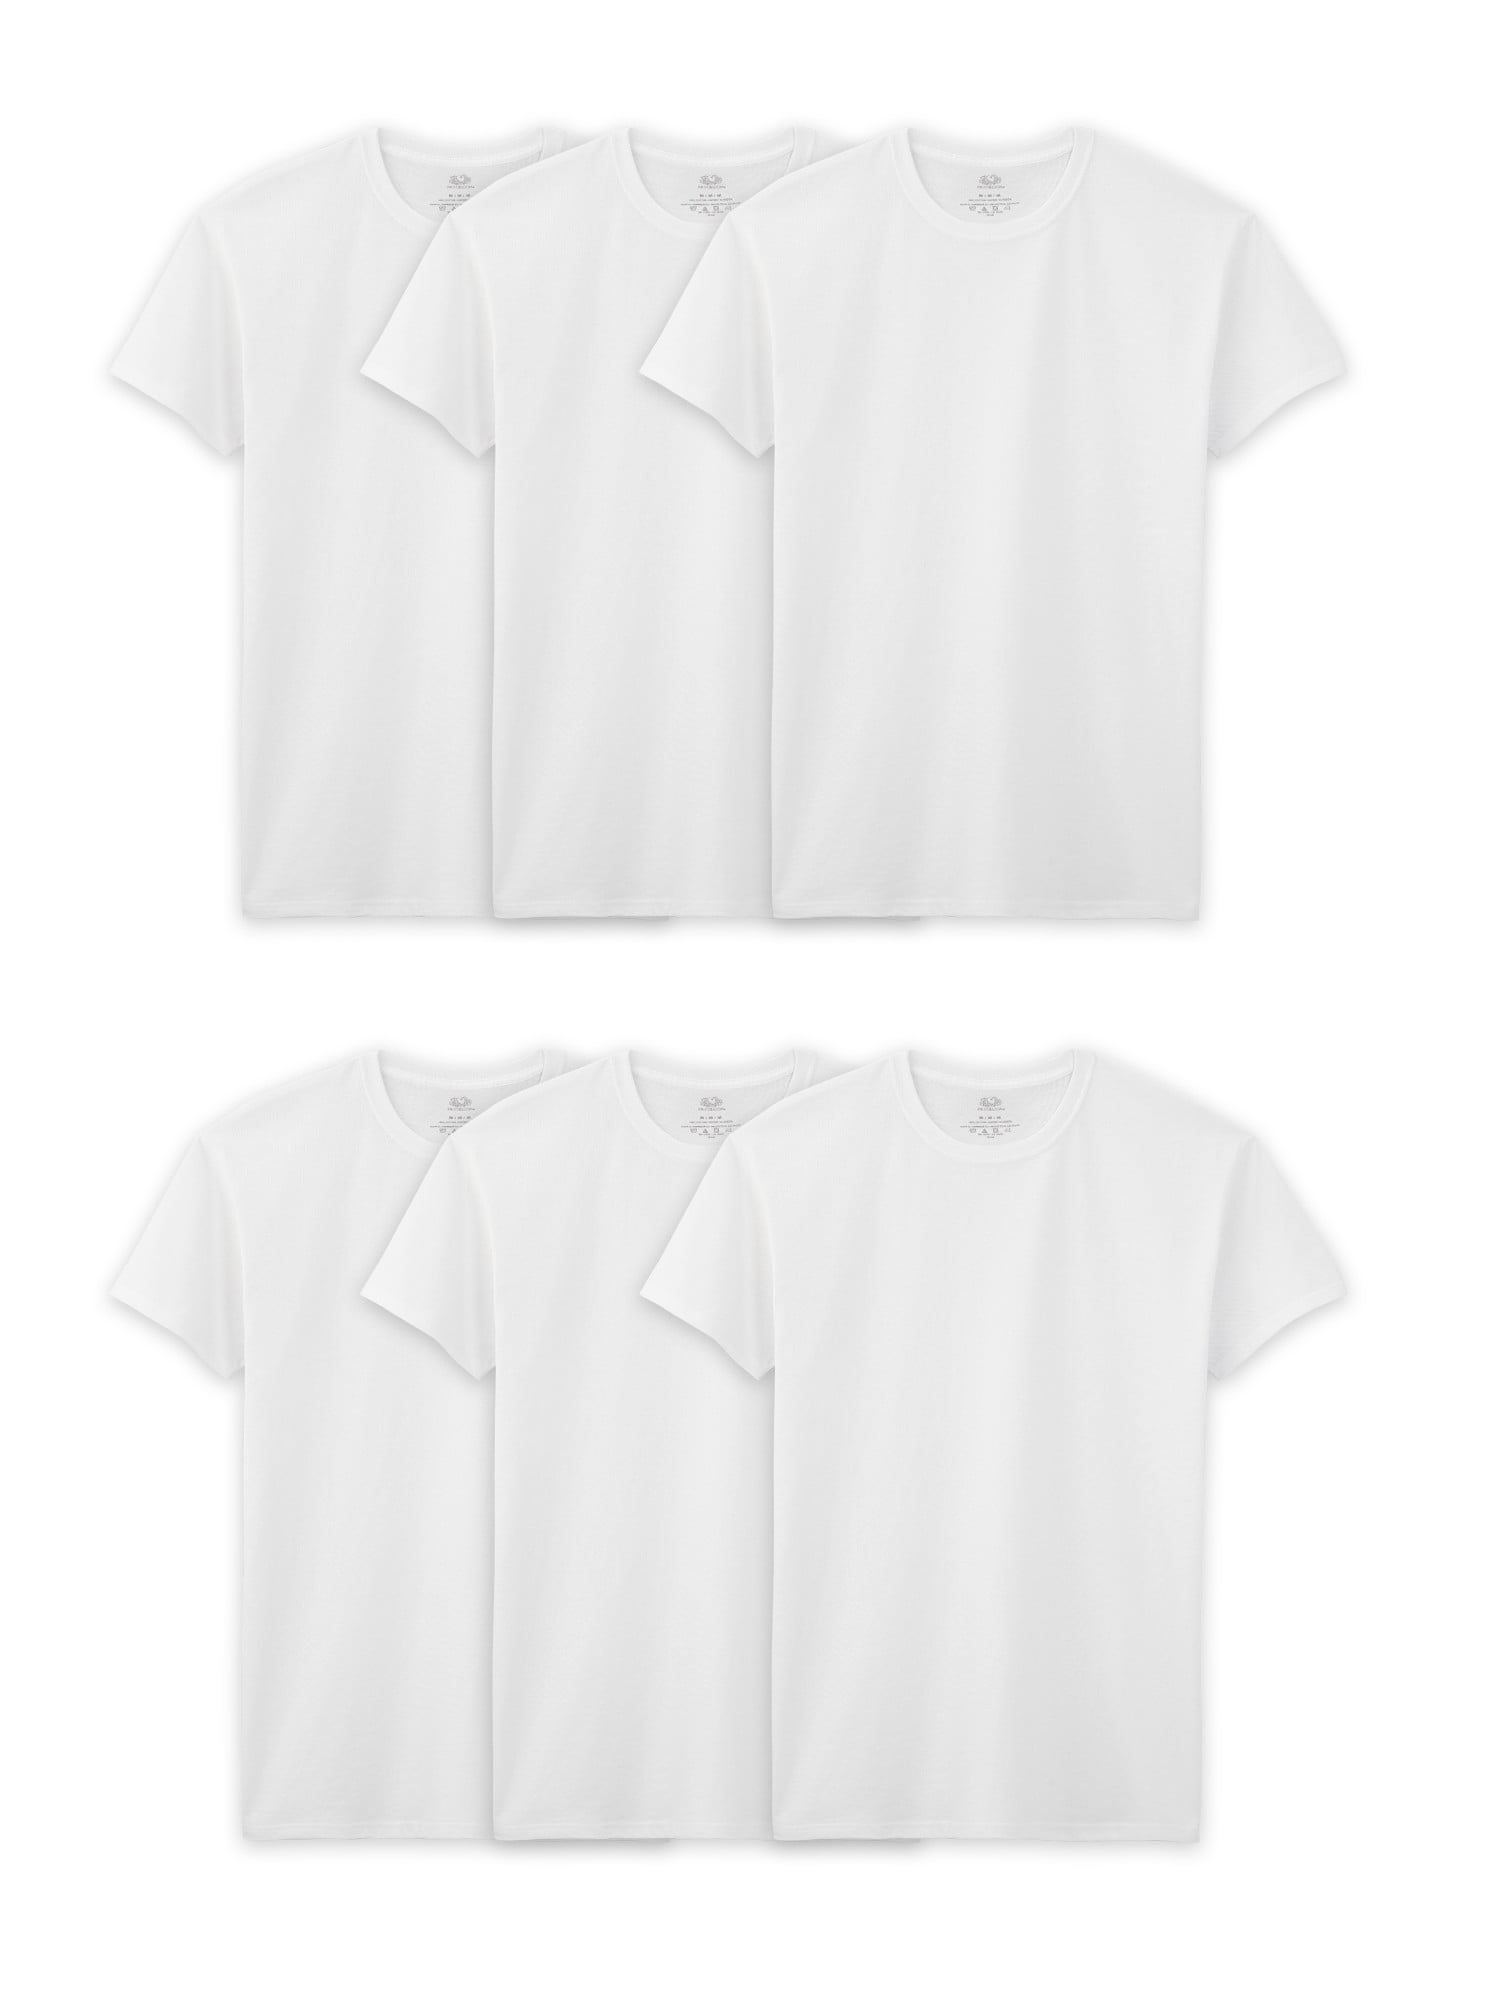 Fruit of the Loom Men's White Crew Undershirts, 6 Pack, Sizes S-3XL